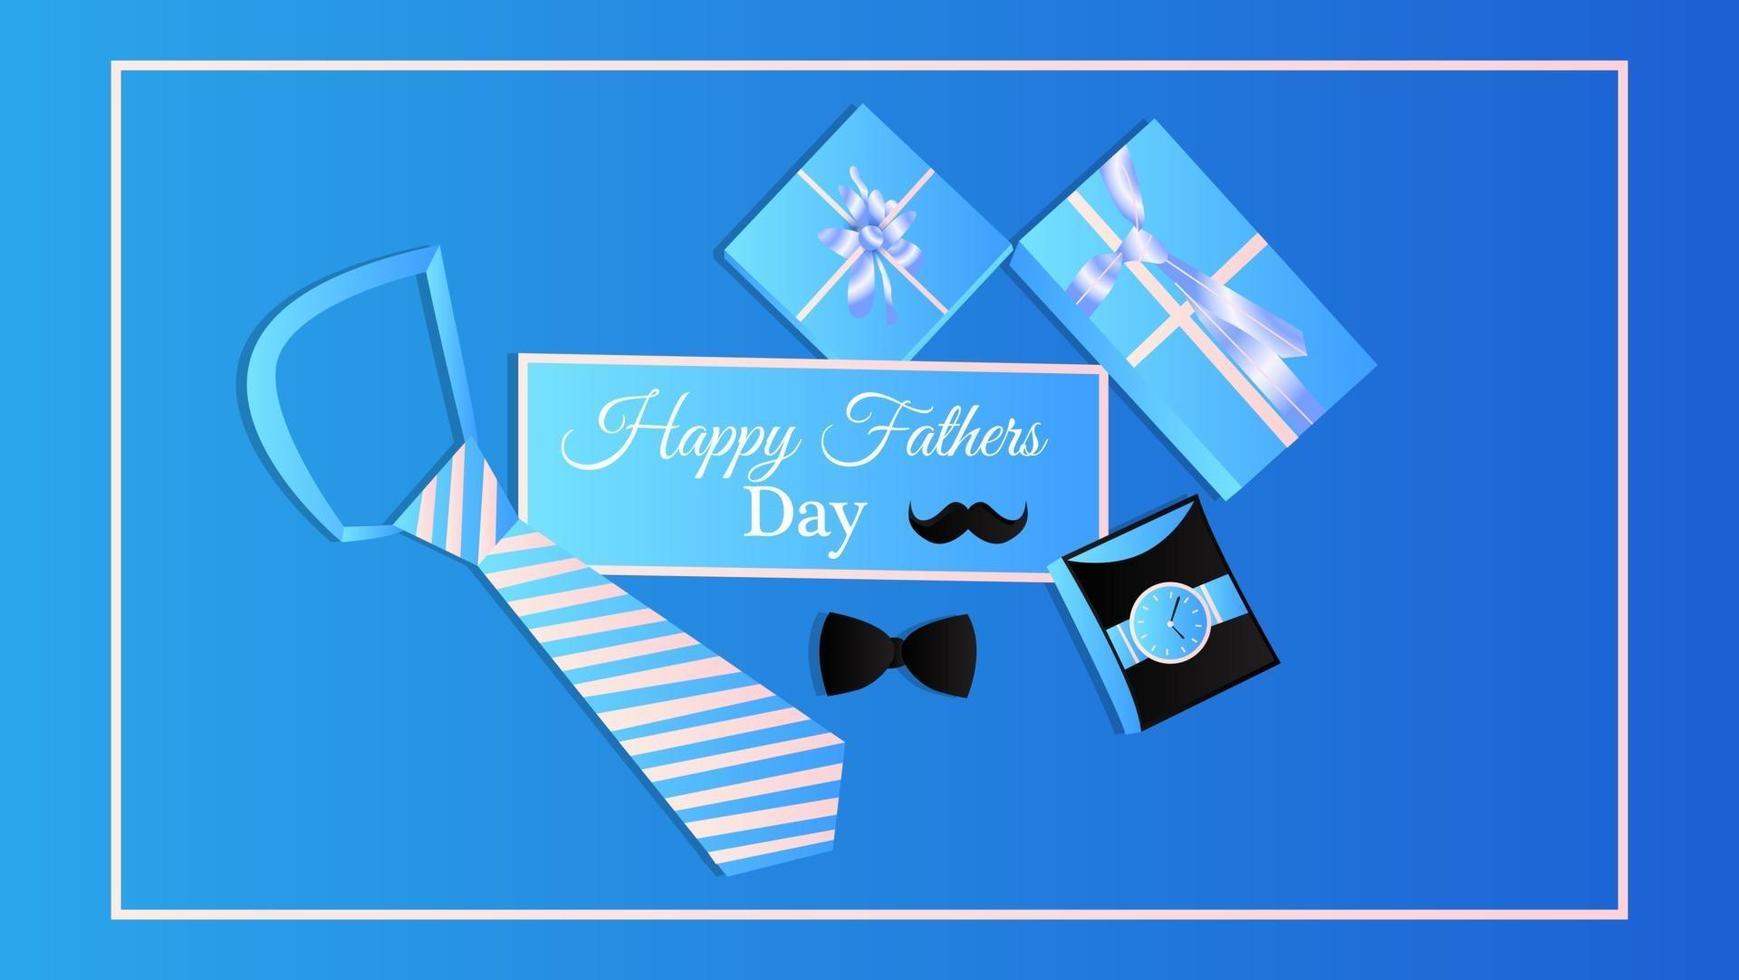 Greetings and presents for Fathers Day in flat lay styling vector